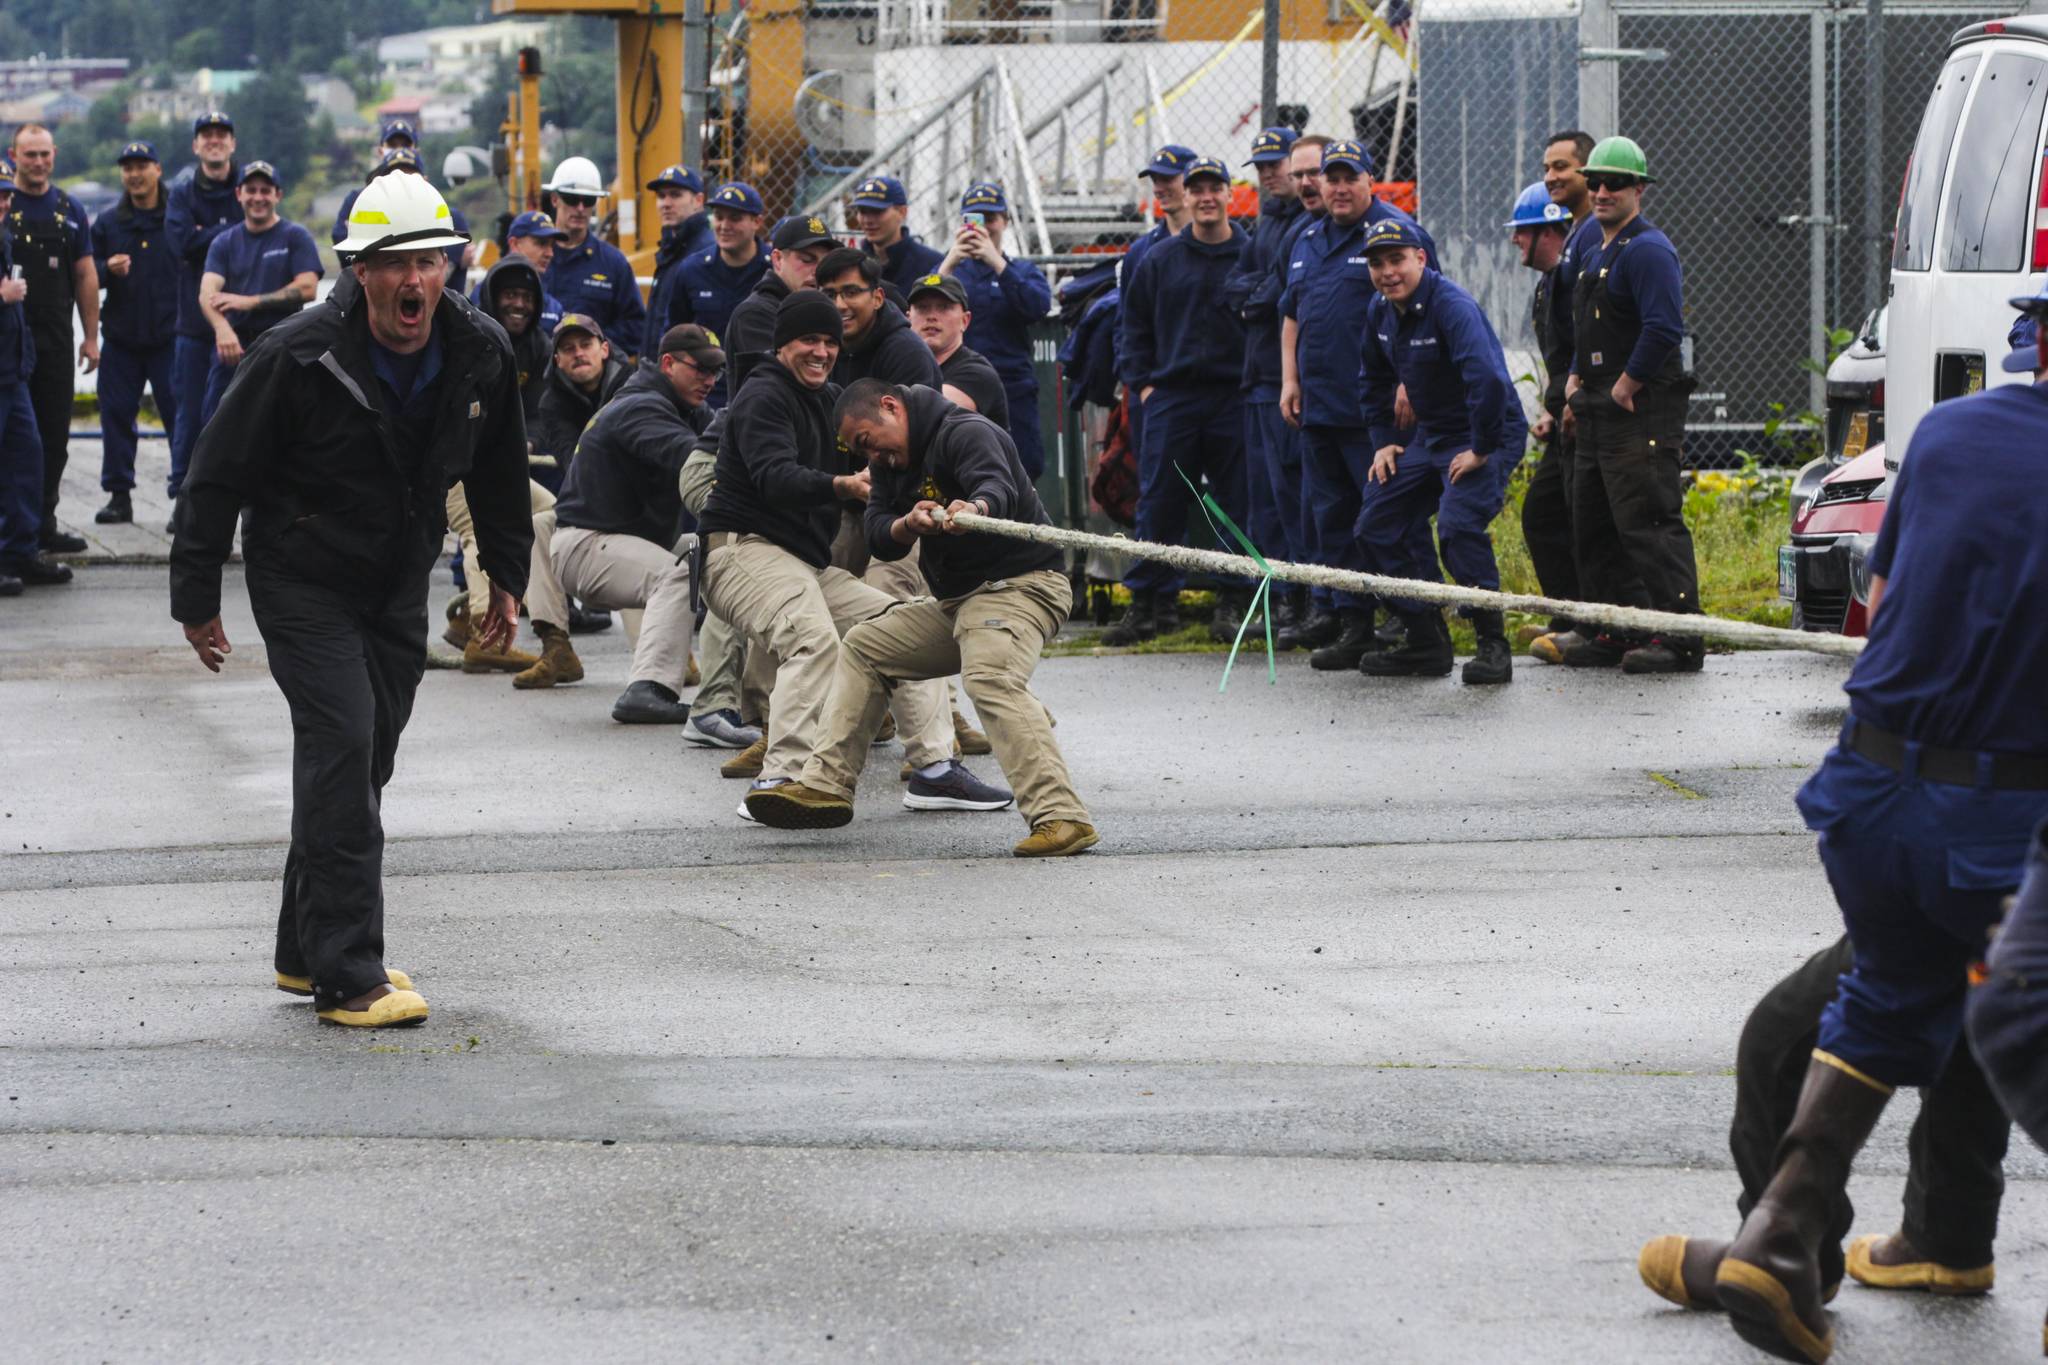 Army divers, in the khaki pants, compete against a team of Coast Guardsmen in the tug of war, one of the inter-vessel competitions during this year’s Buoy Tender Roundup at Sector Juneau, on Wednesday, Aug. 25, 2021. (Michael S. Lockett / Juneau Empire)